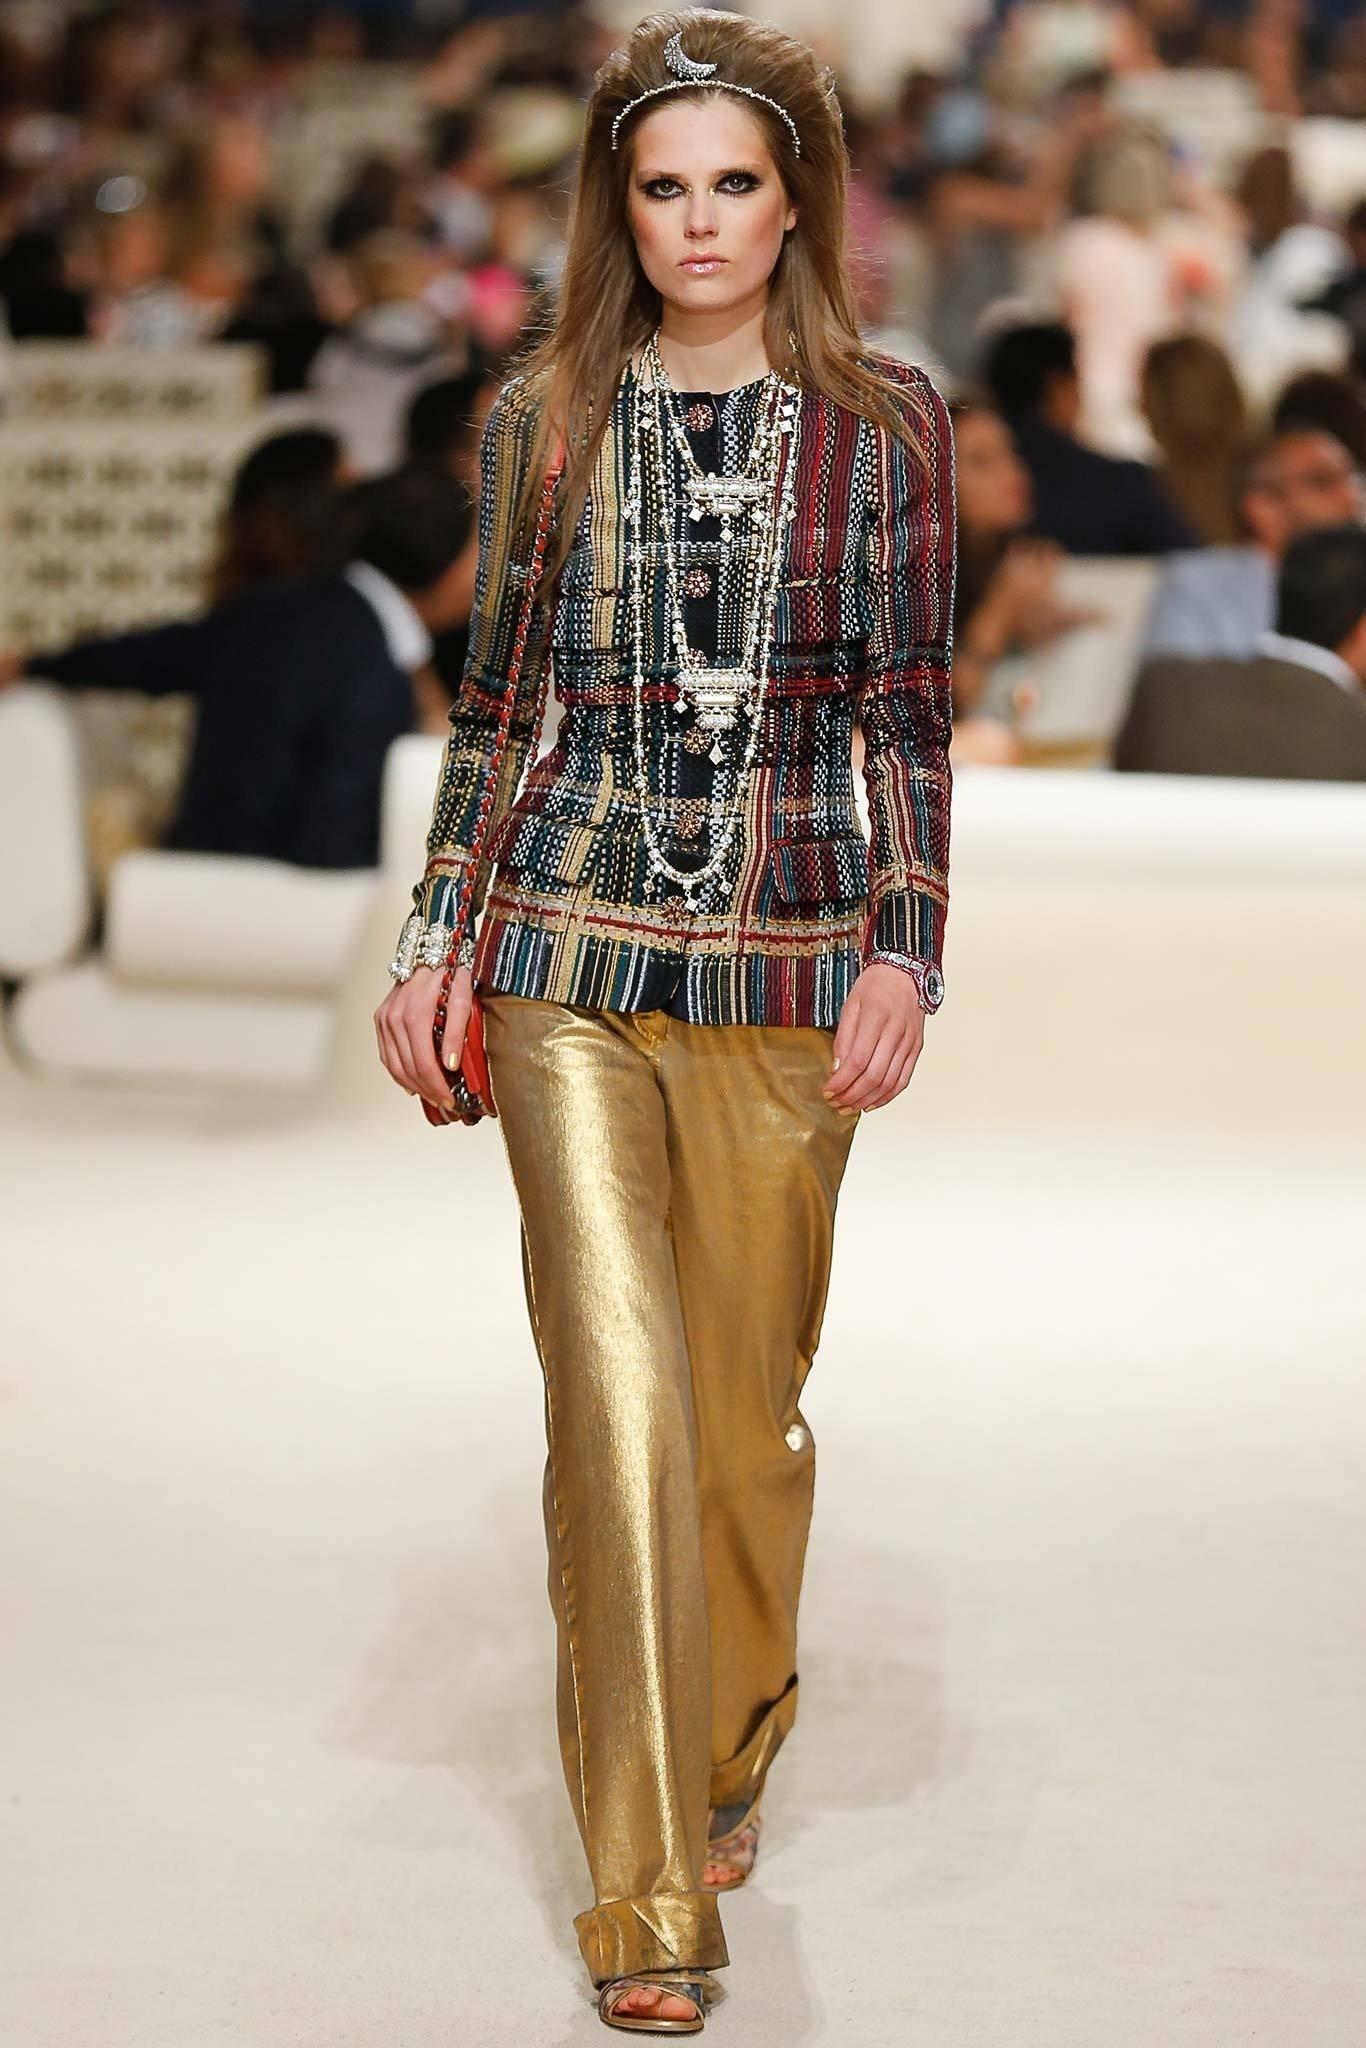 Chanel 15C 2015 resort Paris Dubai runway collection jacket. Two piece fantasy tweed ensemble including a vest and crop jacket that can be worn together or separately. Burgundy, black, navy, beige, red, and green tweed with carnelian red Gripox